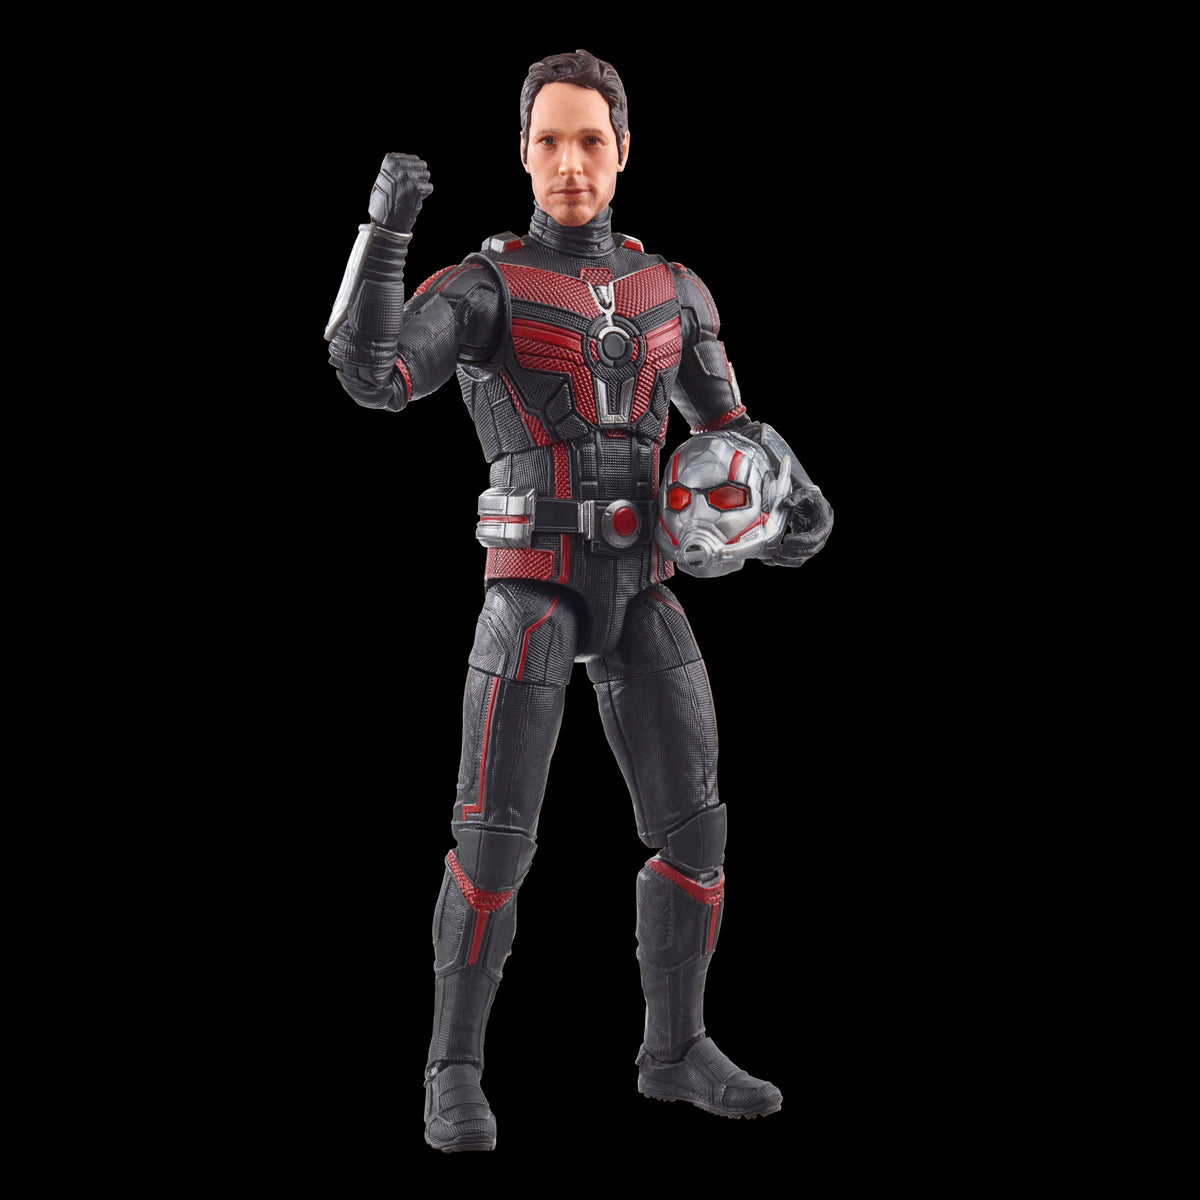 Ant-Man and the Wasp: Quantumania (2023) Review – The Action Elite